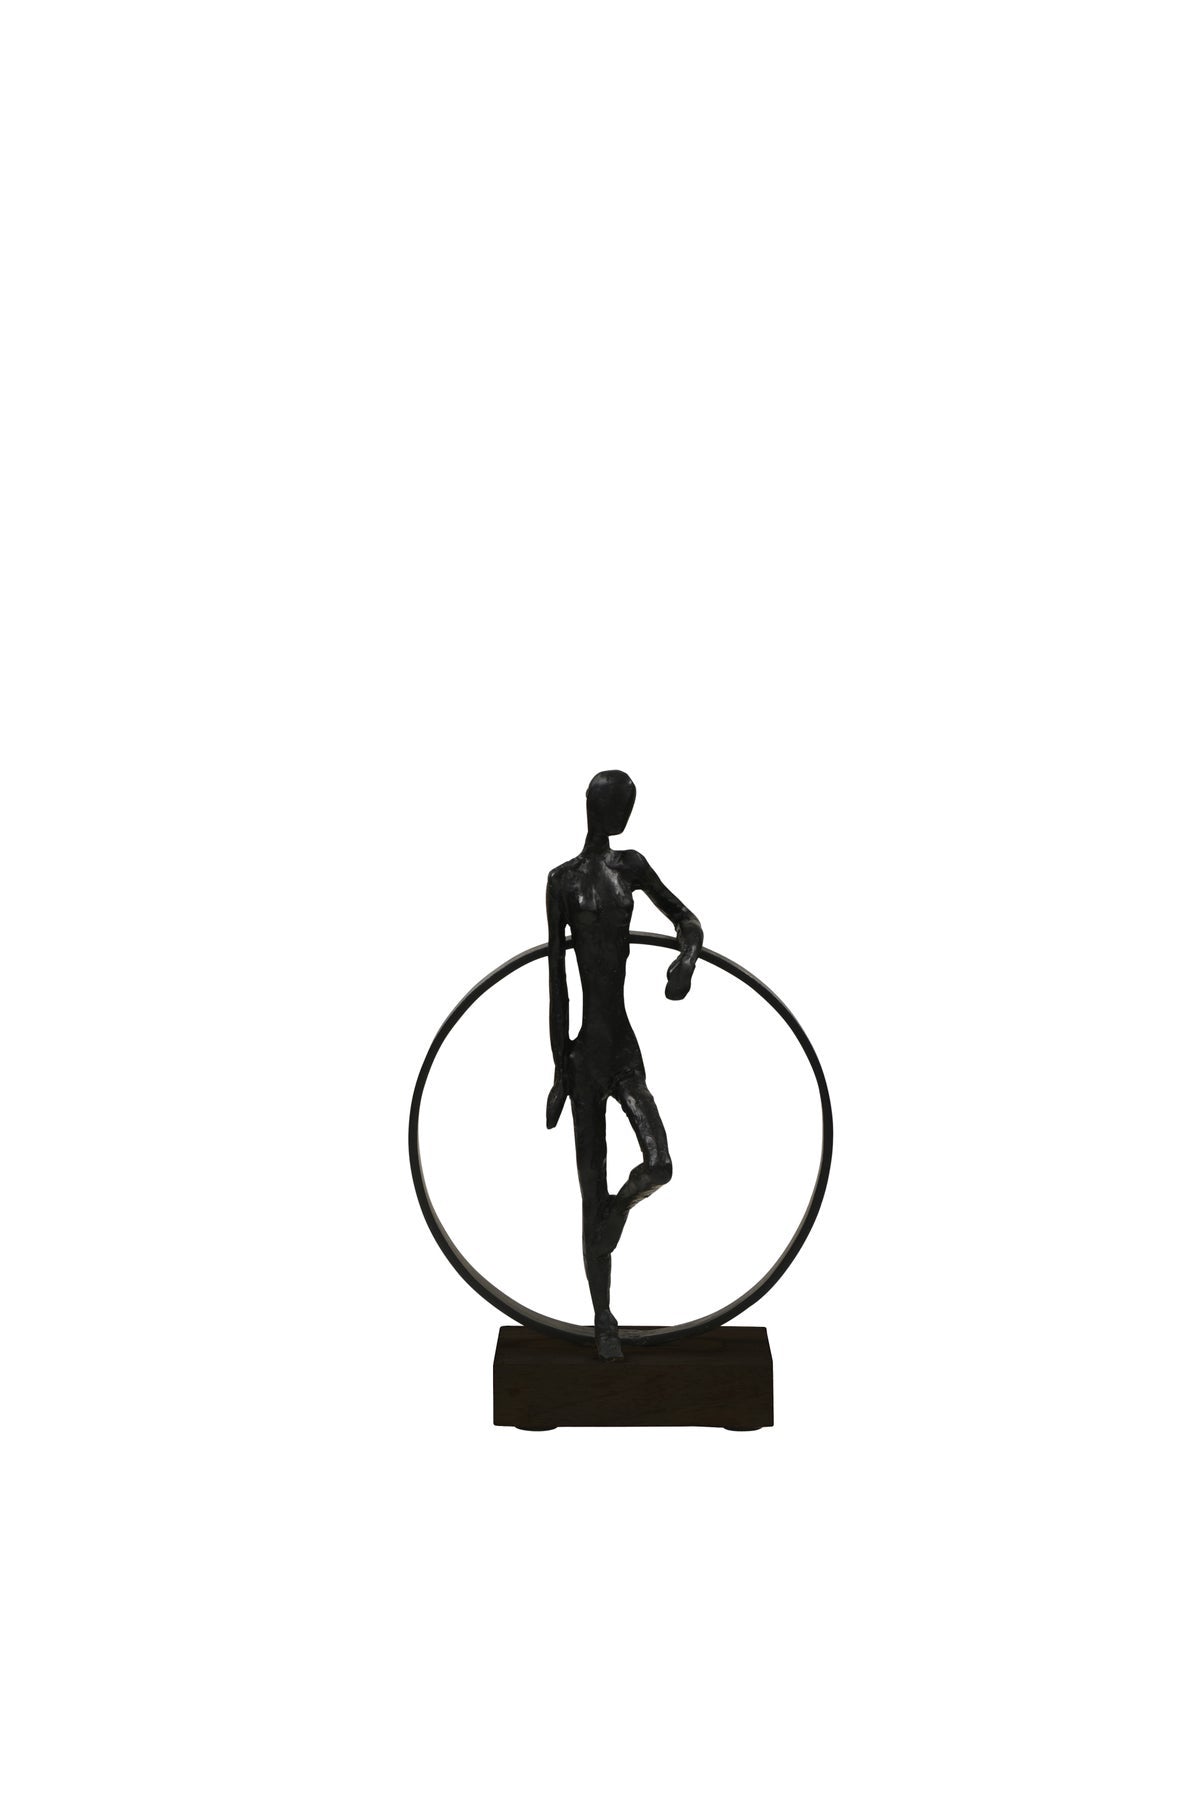 Sculpture - Figure on a ring